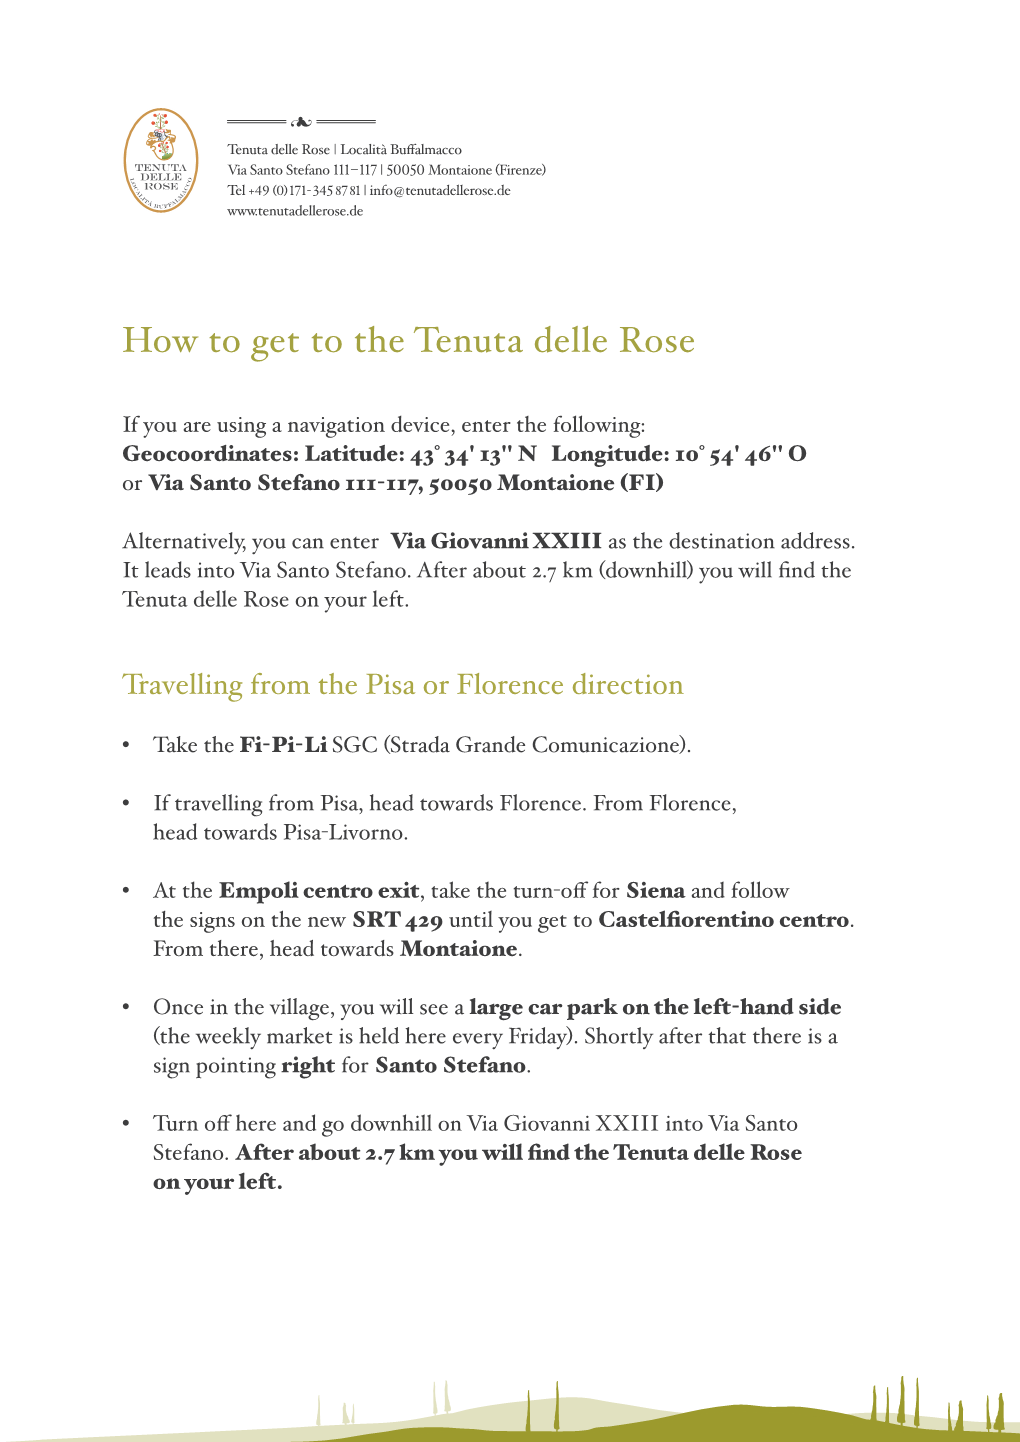 How to Get to the Tenuta Delle Rose